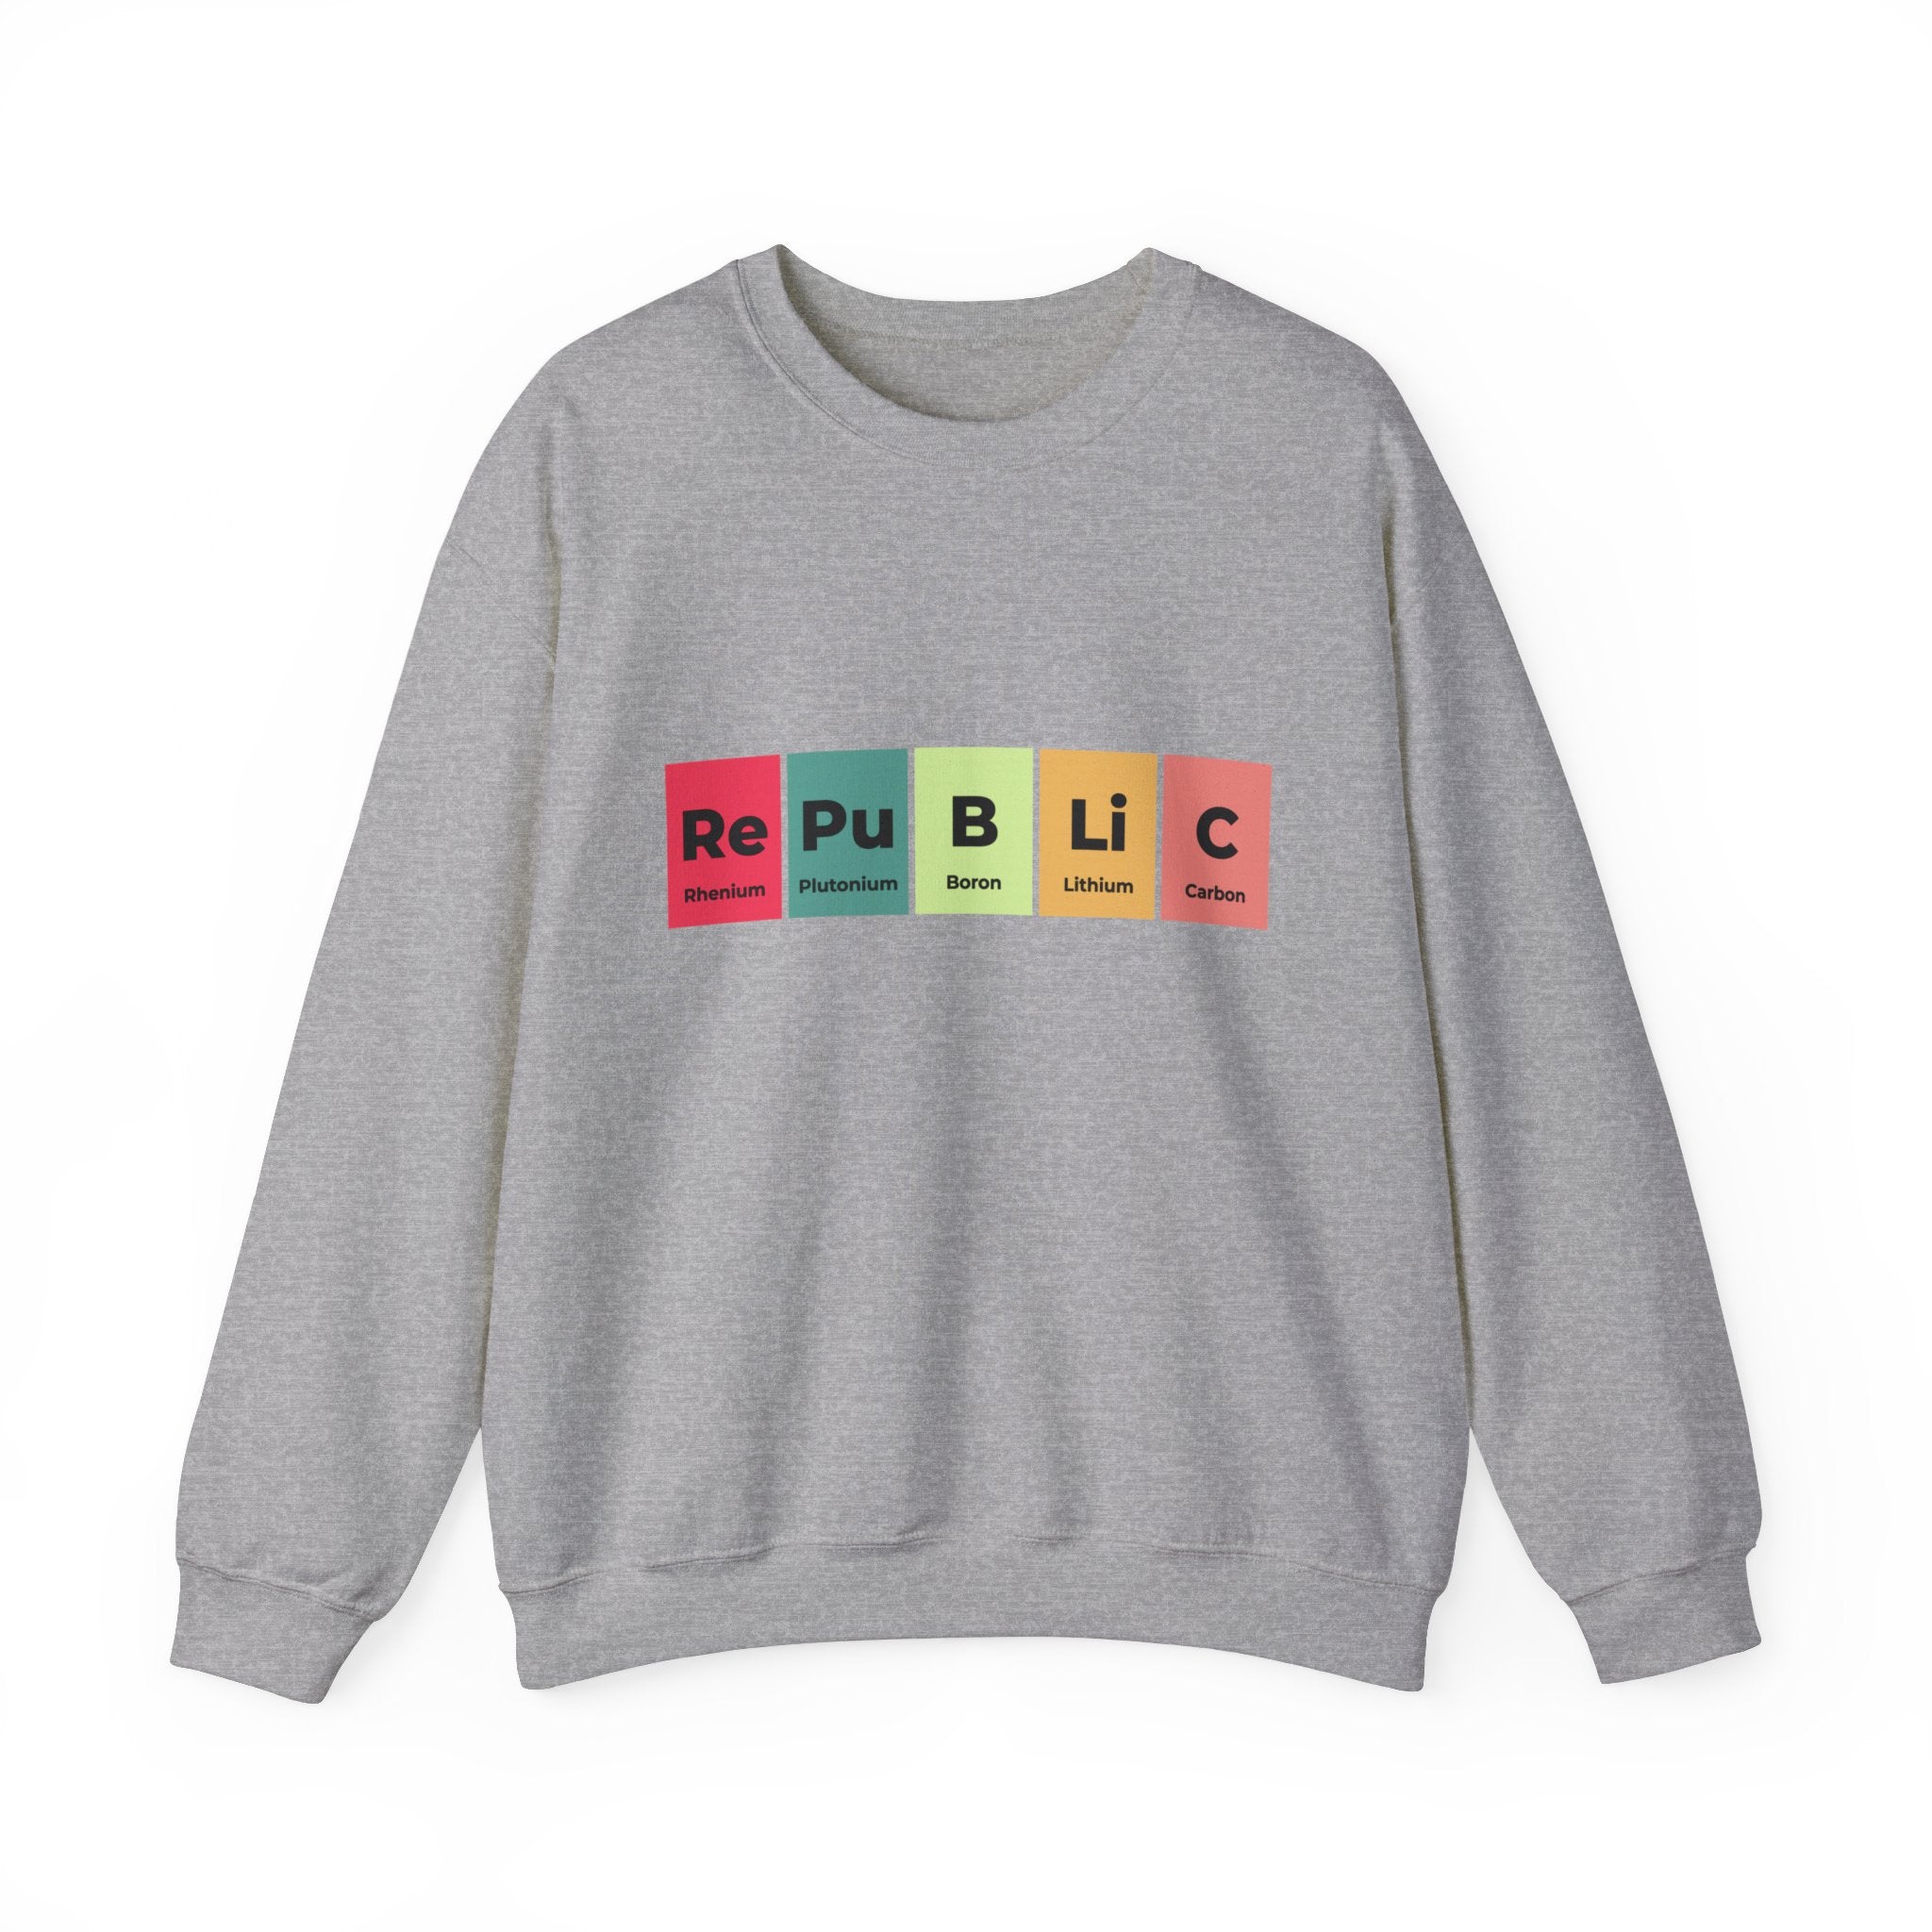 A cozy gray Republic - Sweatshirt featuring the word "Republic" displayed with each letter inside colored squares resembling periodic table elements, perfect for winter days.